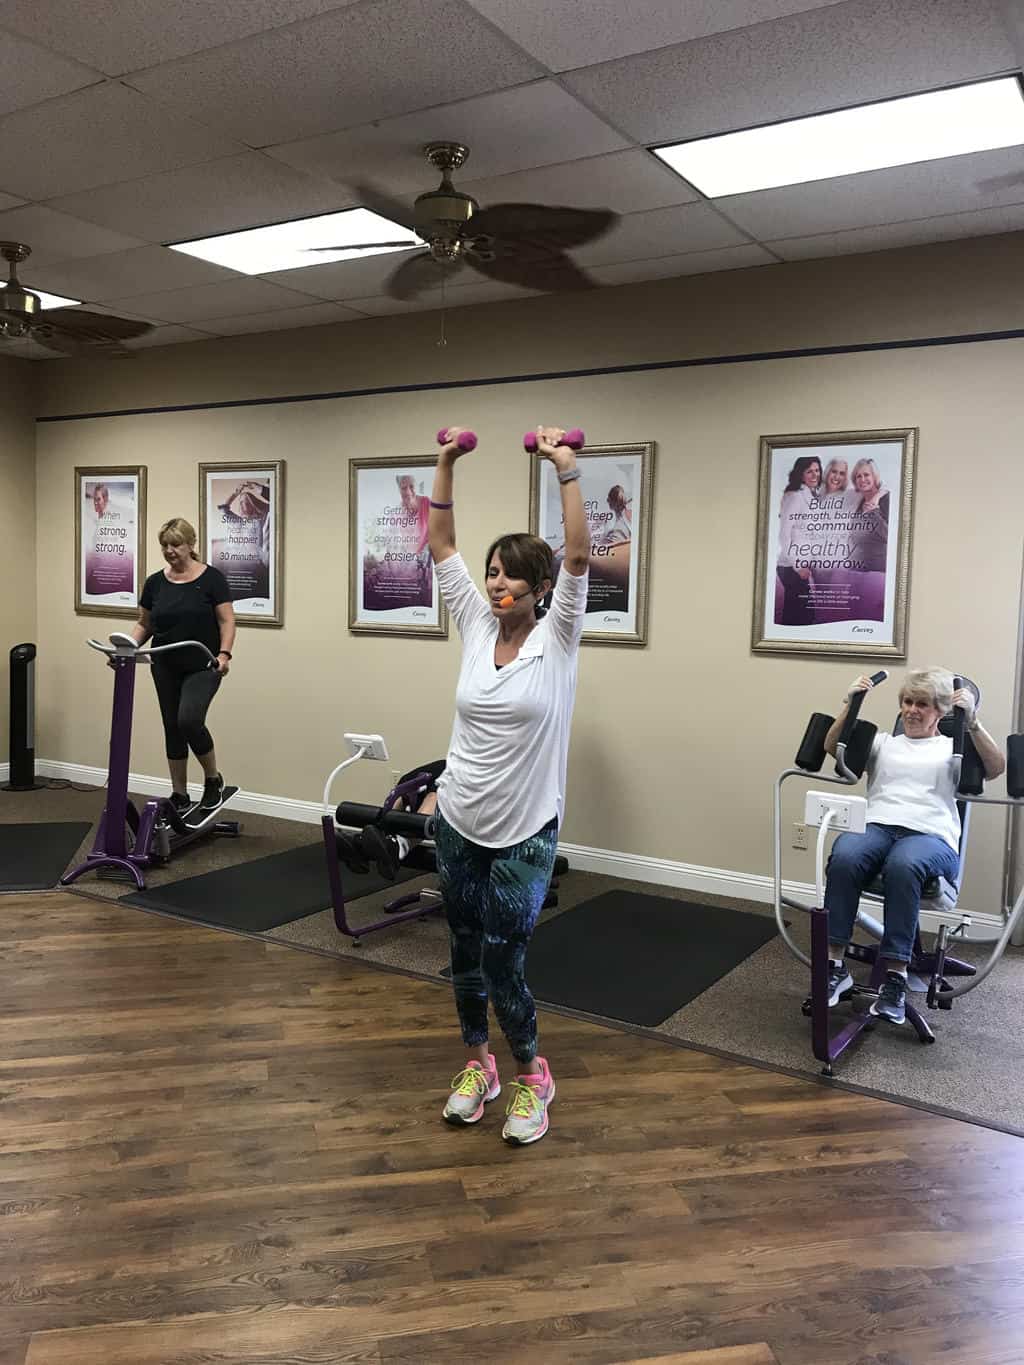 Are you looking for a new exercise routine? Curves offers a fun 30-minute circuit training workout for women only that works every major muscle group with strength training, cardio and stretching.